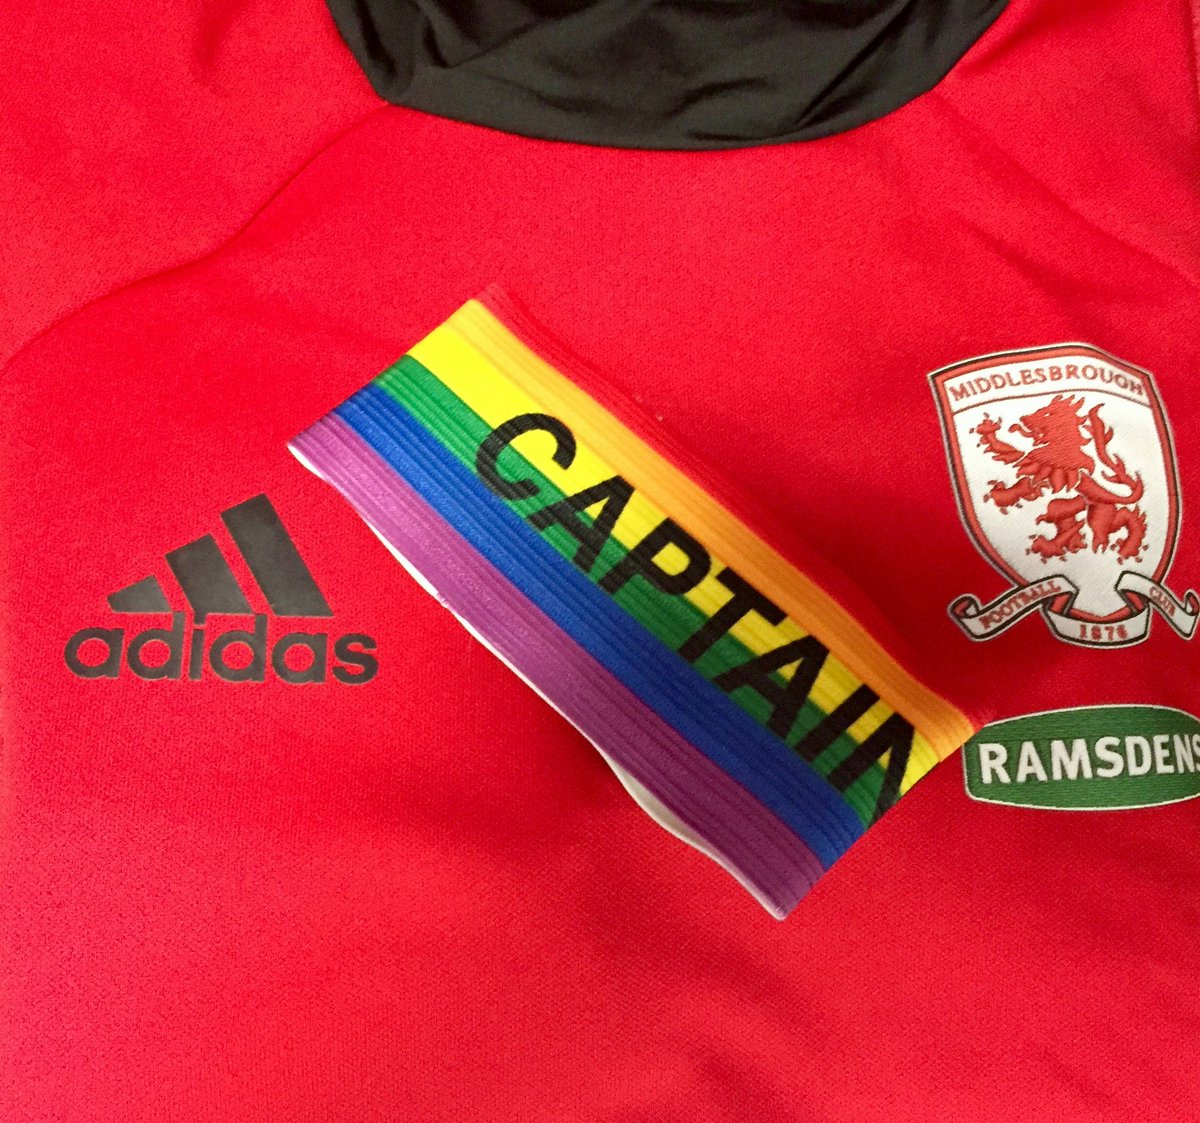 RT @Boro: Our captain will be wearing this armband today as #Boro support the @stonewalluk rainbow campaign. #UTB https://t.co/Nq6vleYQvF